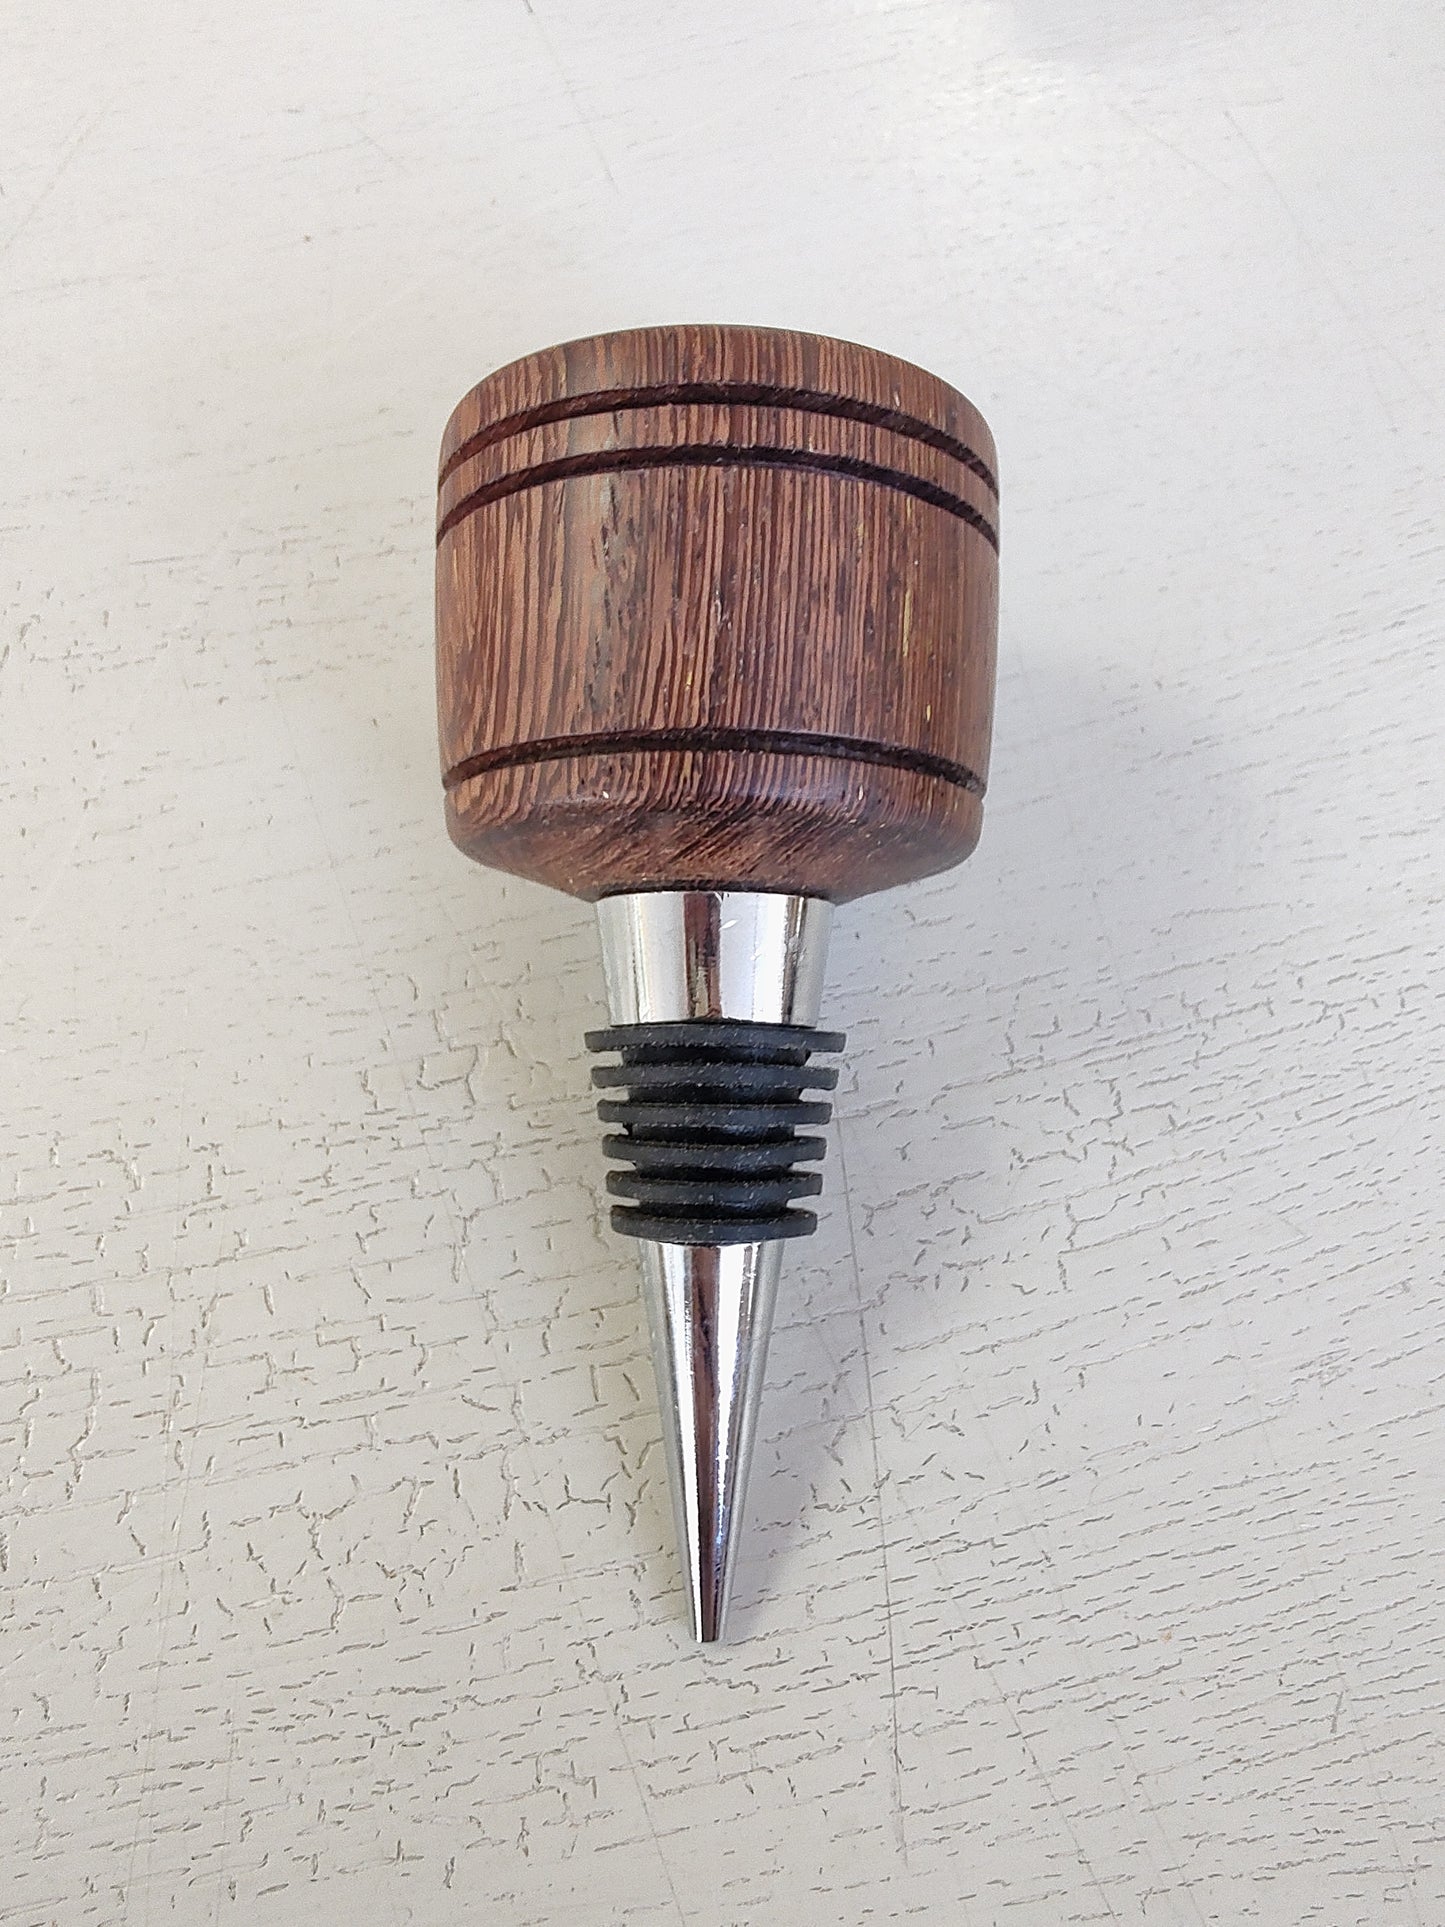 From The Shed- Hand Turned Reclaimed Wooden Wine Bottle Stopper, Zebrano